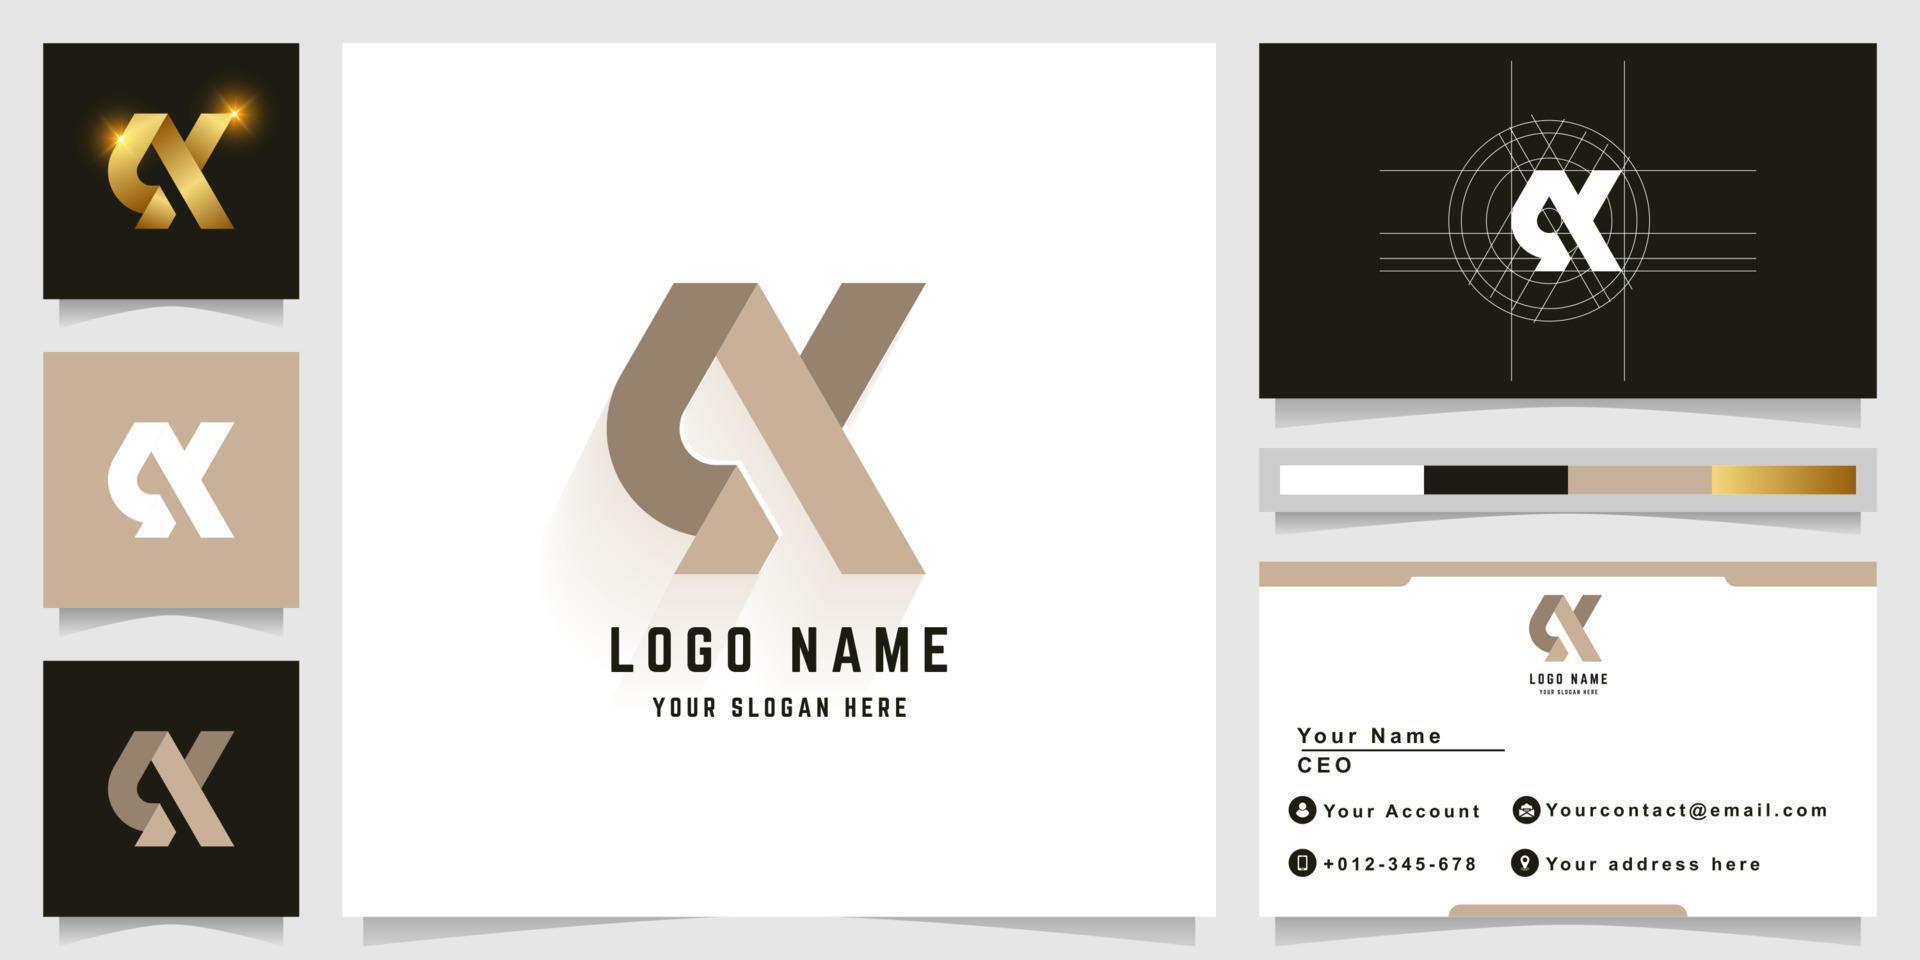 Letter Ax or Sy monogram logo with business card design vector